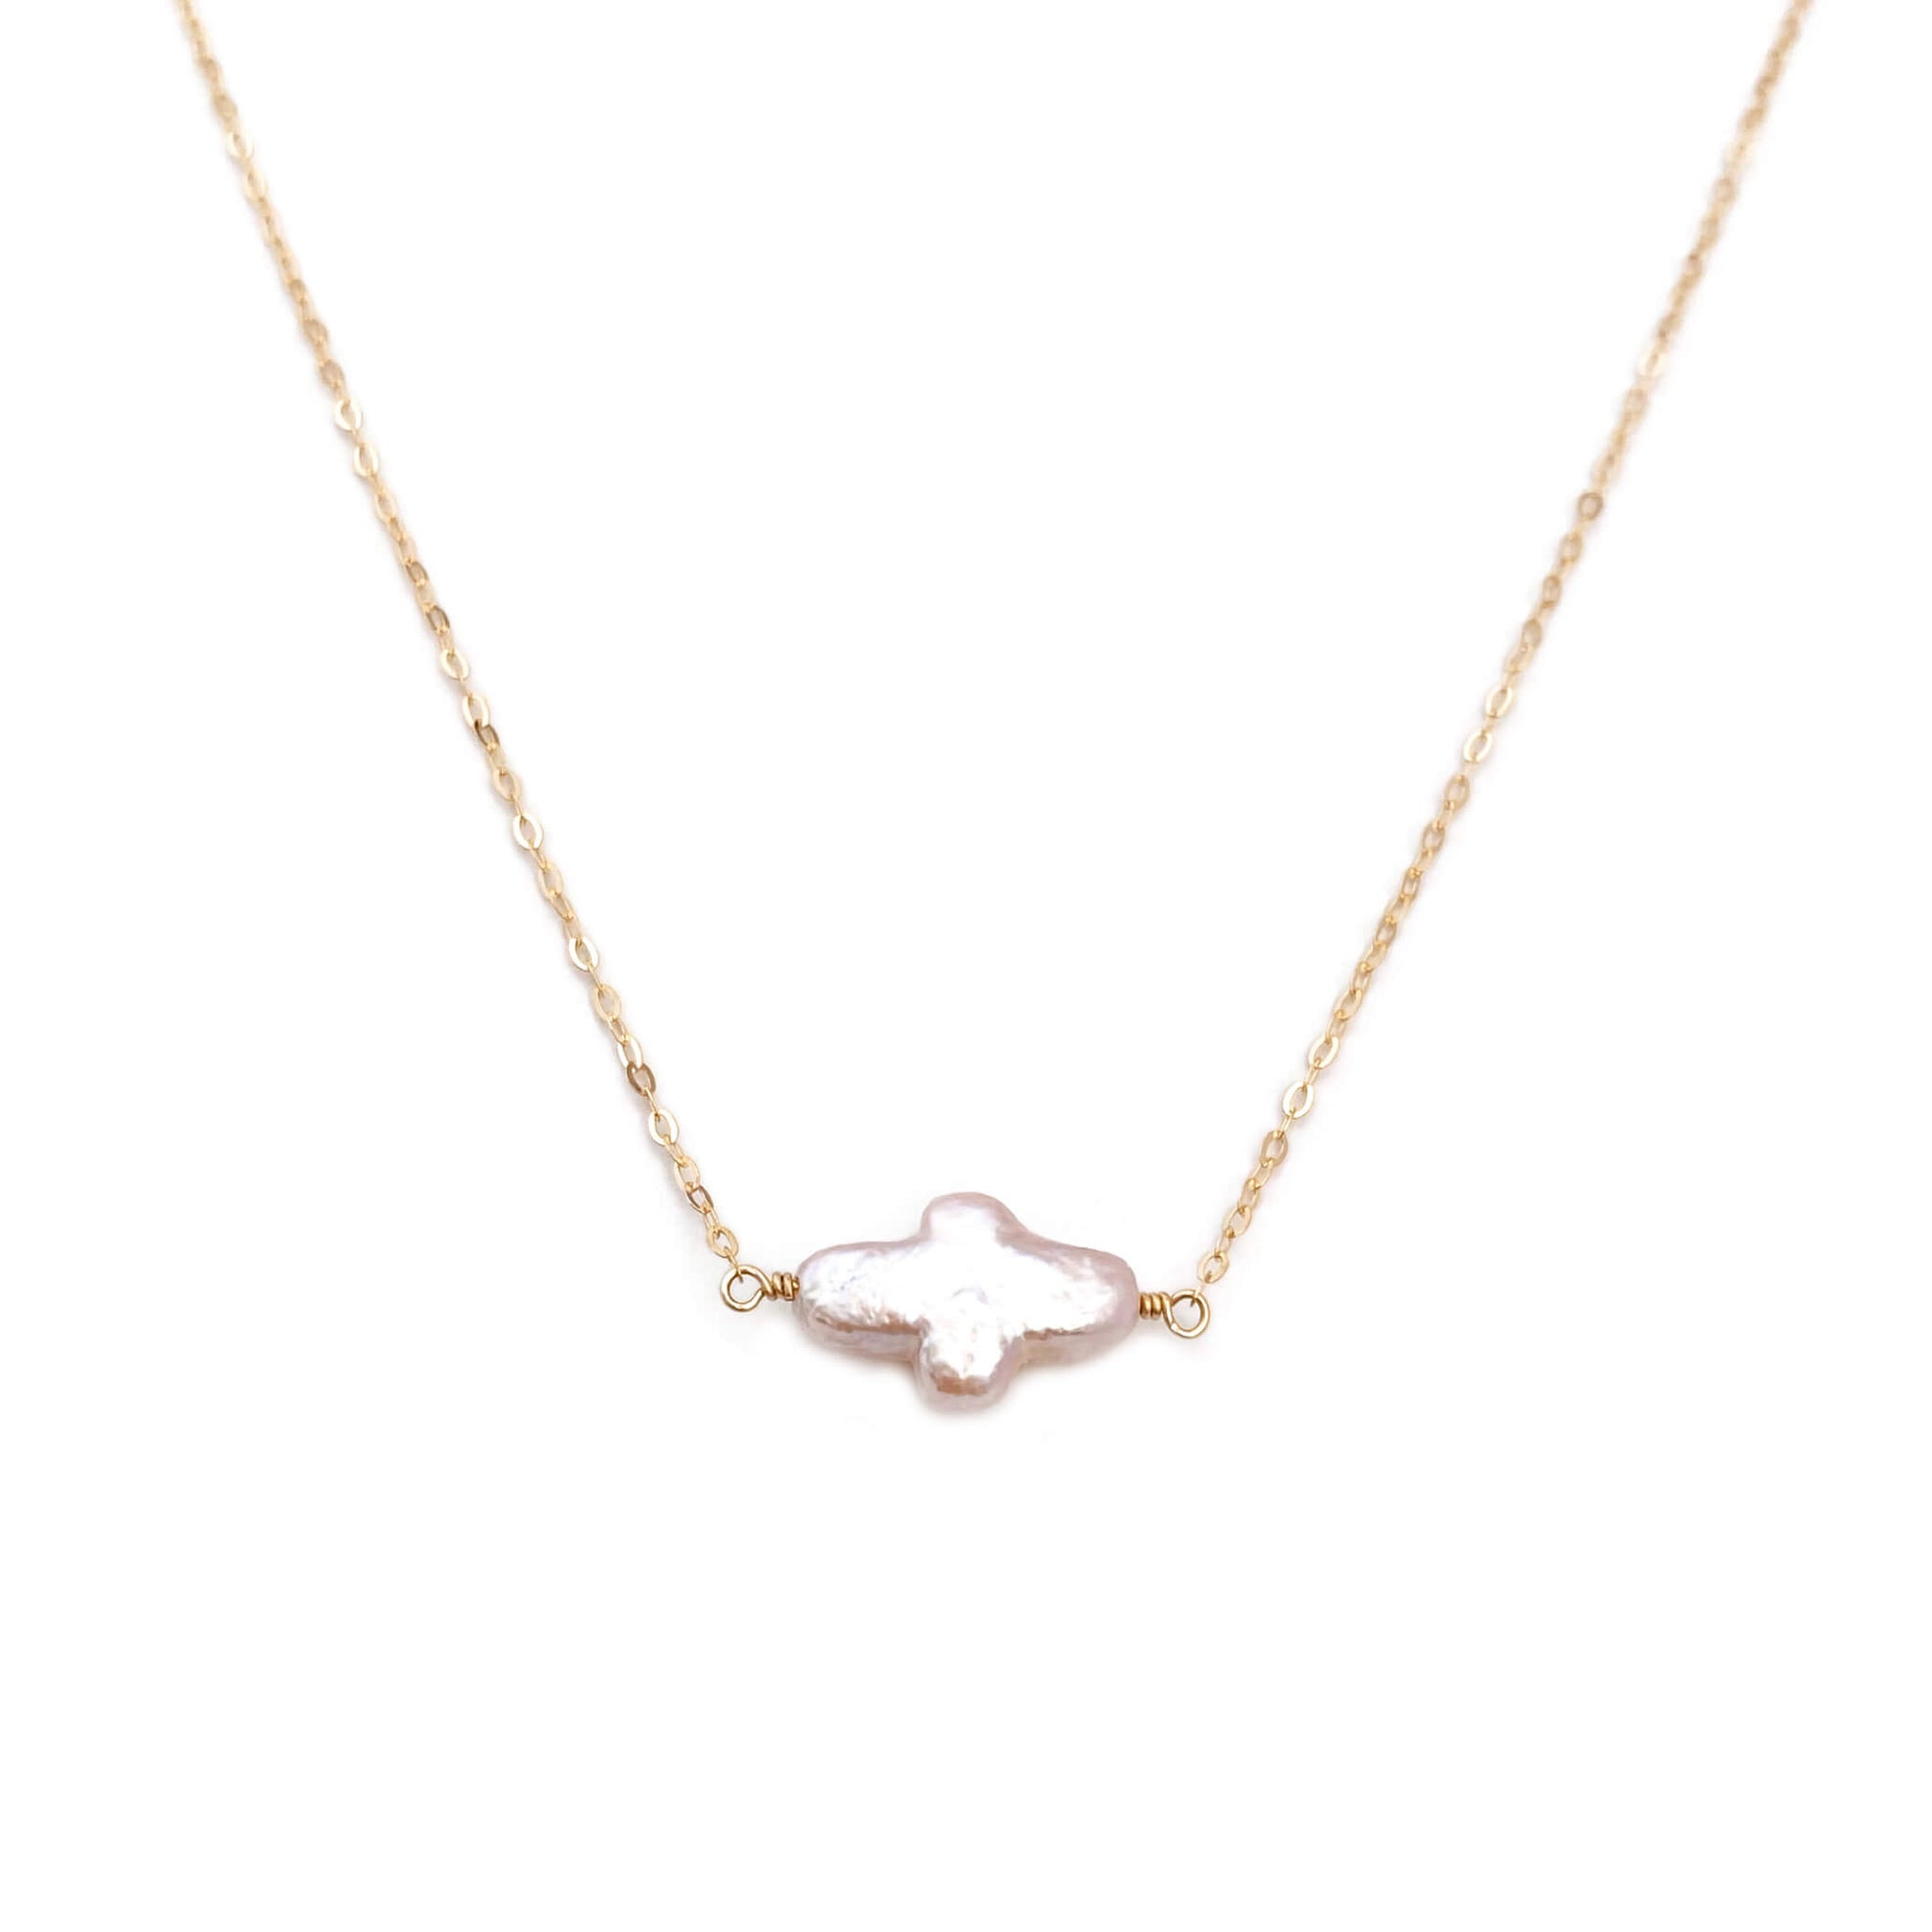 Personalized name necklace with sideways cross in Sterling Silver, white  gold, rose gold or yellow gold.